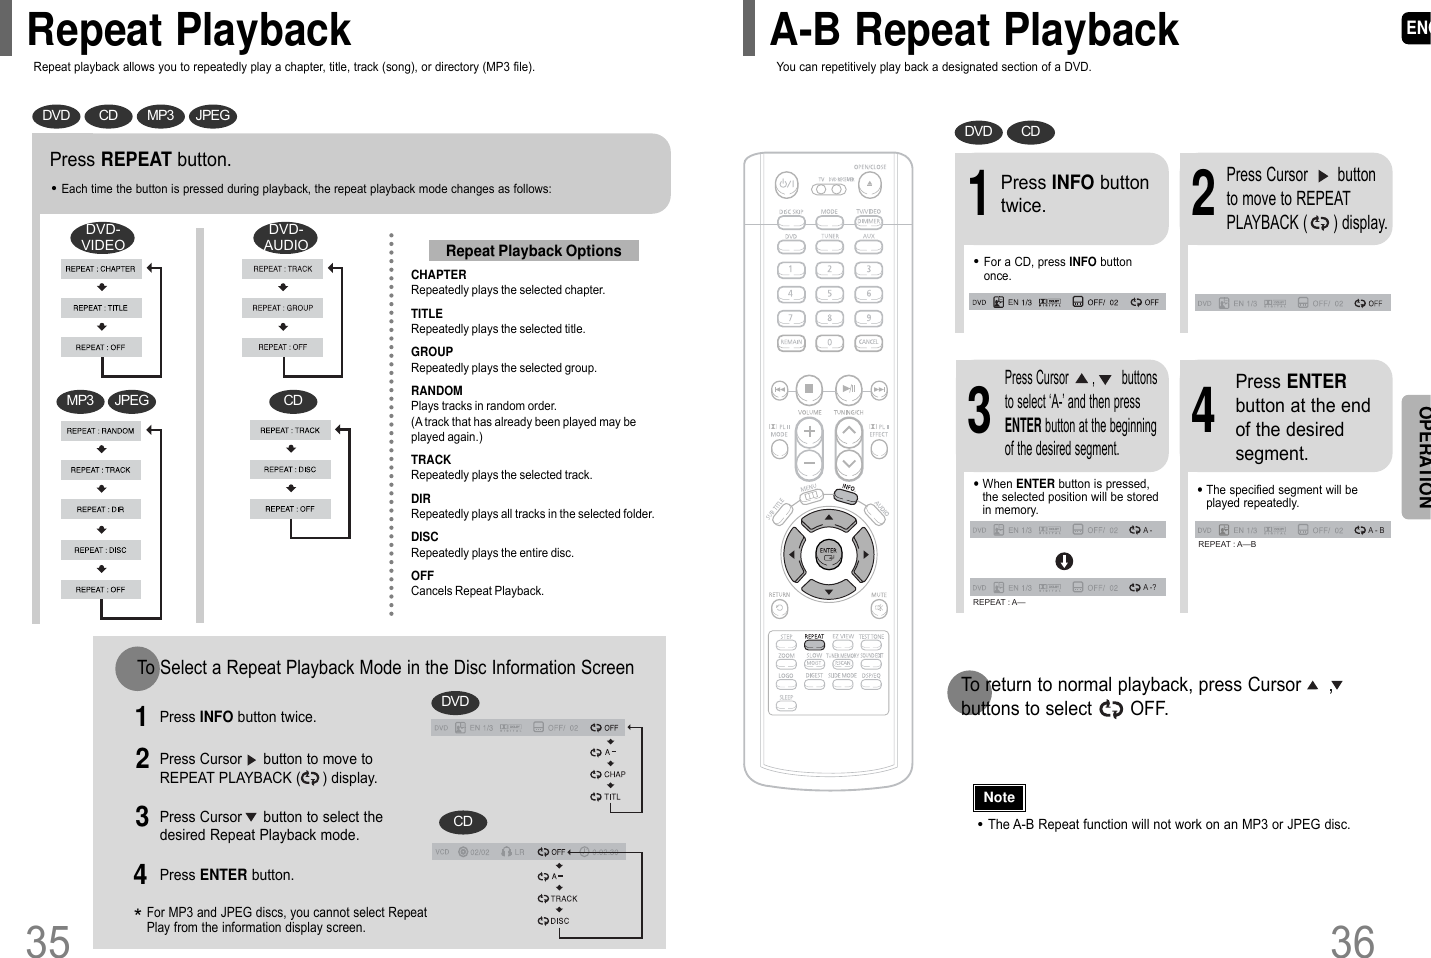 ENG36•The A-B Repeat function will not work on an MP3 or JPEG disc.2Press Cursor       buttonto move to REPEATPLAYBACK (      ) display.•For a CD, press INFO buttononce.1Press INFO buttontwice.A -A -?REPEAT : A—A - BREPEAT : A—B•The specified segment will beplayed repeatedly.4Press ENTERbutton at the endof the desiredsegment.•When ENTER button is pressed,the selected position will be storedin memory.3Press Cursor       ,        buttonsto select ‘A-’ and then pressENTER button at the beginningof the desired segment.To return to normal playback, press Cursor     ,buttons to select       OFF.DVD CD35Press REPEAT button.•Each time the button is pressed during playback, the repeat playback mode changes as follows:CHAPTERRepeatedly plays the selected chapter.TITLERepeatedly plays the selected title.GROUPRepeatedly plays the selected group.RANDOMPlays tracks in random order.(A track that has already been played may beplayed again.)TRACKRepeatedly plays the selected track.DIRRepeatedly plays all tracks in the selected folder.DISCRepeatedly plays the entire disc.OFFCancels Repeat Playback.Repeat Playback OptionsNoteOPERATIONDVD CD MP3 JPEGTo Select a Repeat Playback Mode in the Disc Information ScreenPress INFO button twice.1Press Cursor     button to move toREPEAT PLAYBACK (     ) display.2Press Cursor     button to select thedesired Repeat Playback mode.3DVDCD*For MP3 and JPEG discs, you cannot select RepeatPlay from the information display screen.Press ENTER button.4Repeat playback allows you to repeatedly play a chapter, title, track (song), or directory (MP3 file). You can repetitively play back a designated section of a DVD.Repeat Playback A-B Repeat PlaybackCDMP3 JPEGDVD-VIDEODVD-AUDIO